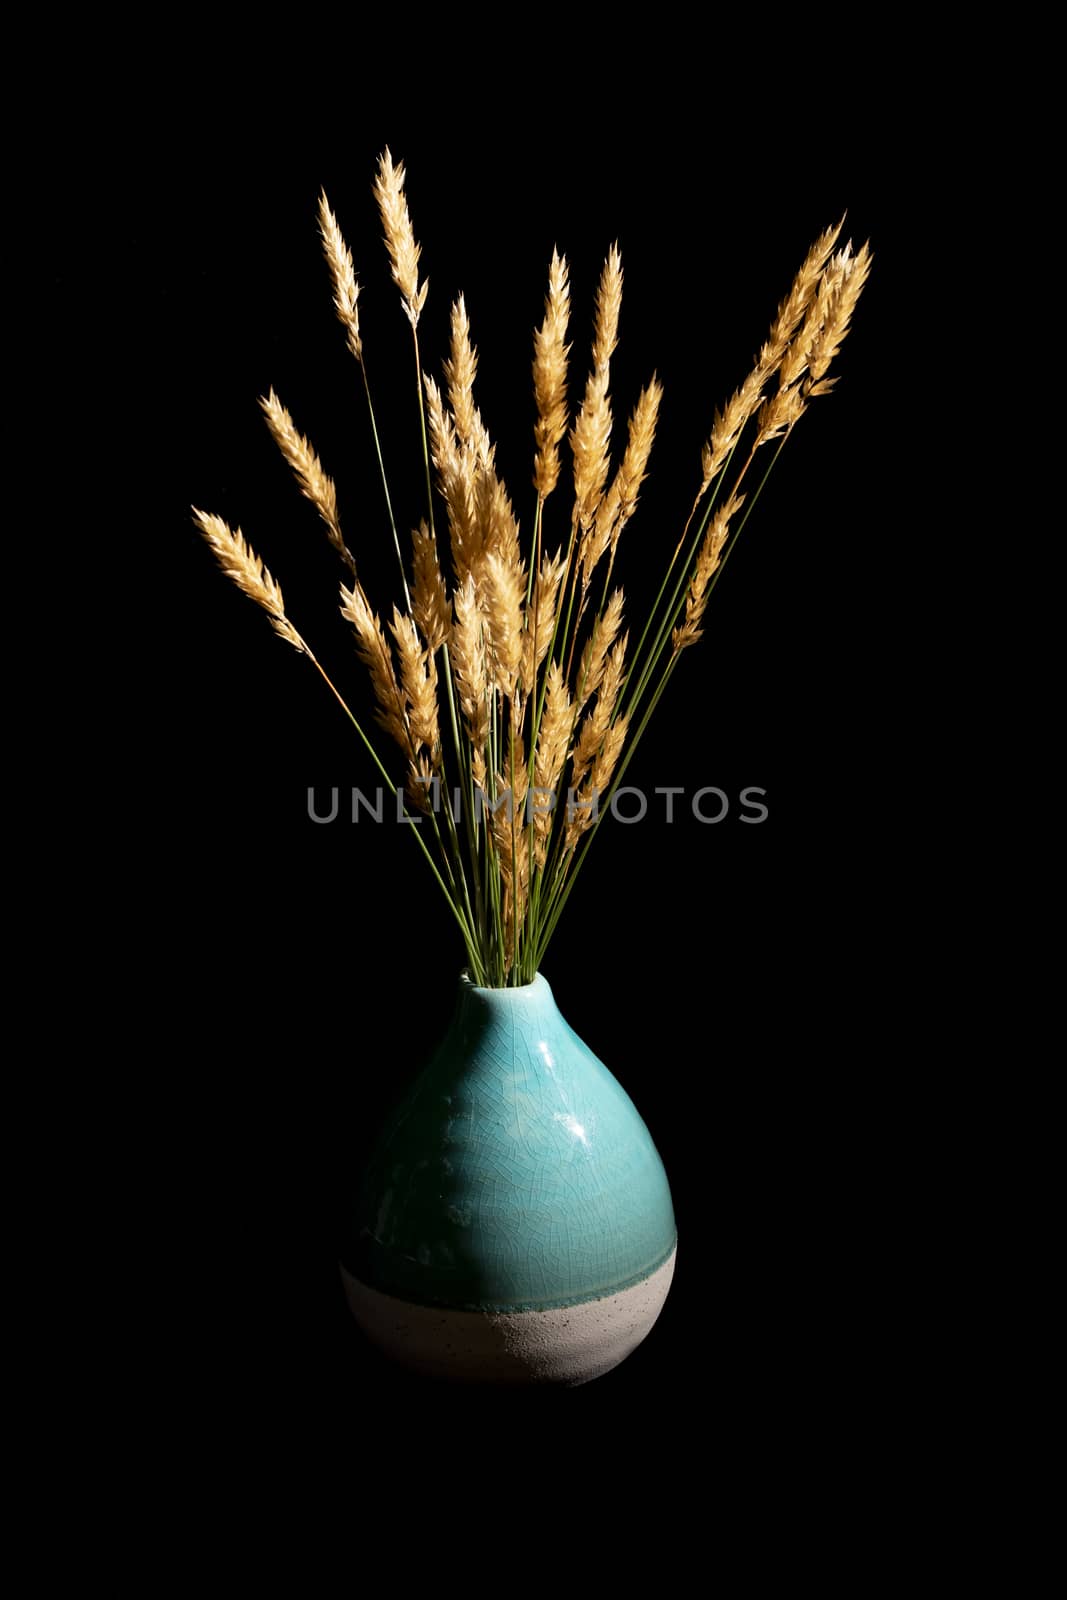 Wild grasses with golden seed heads in a teal blue ceramic vase against a black background.